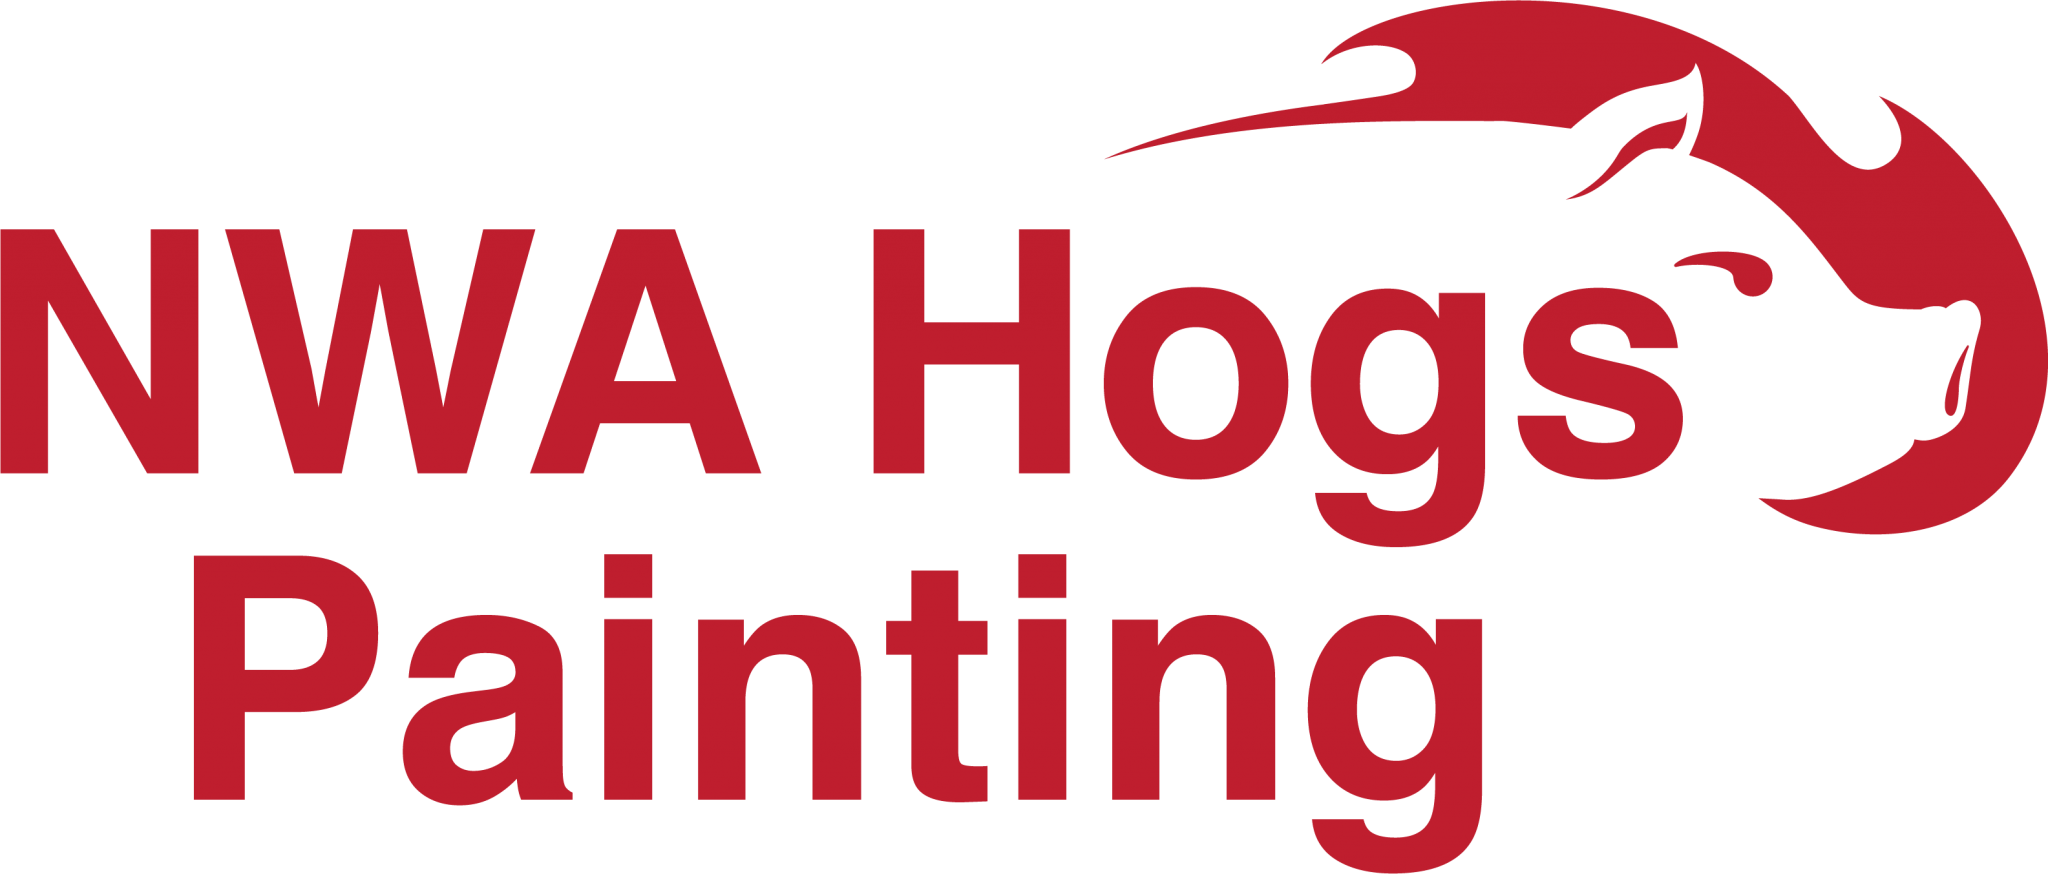 NWA Hogs Painting Adds Centerton, AR, to Its Service Area